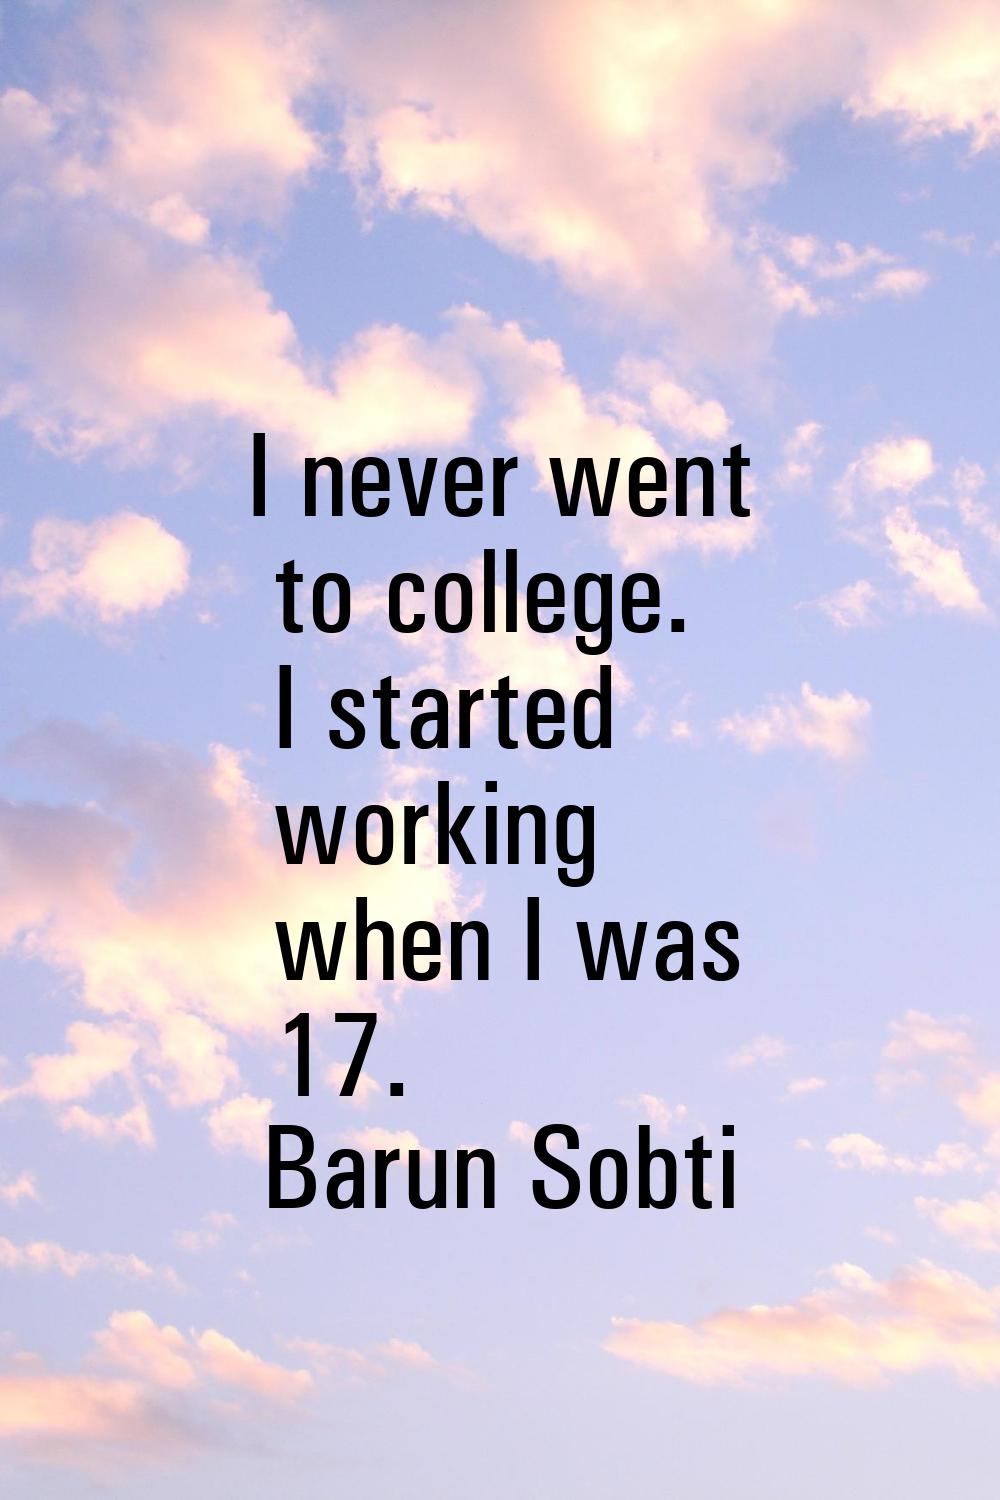 I never went to college. I started working when I was 17.